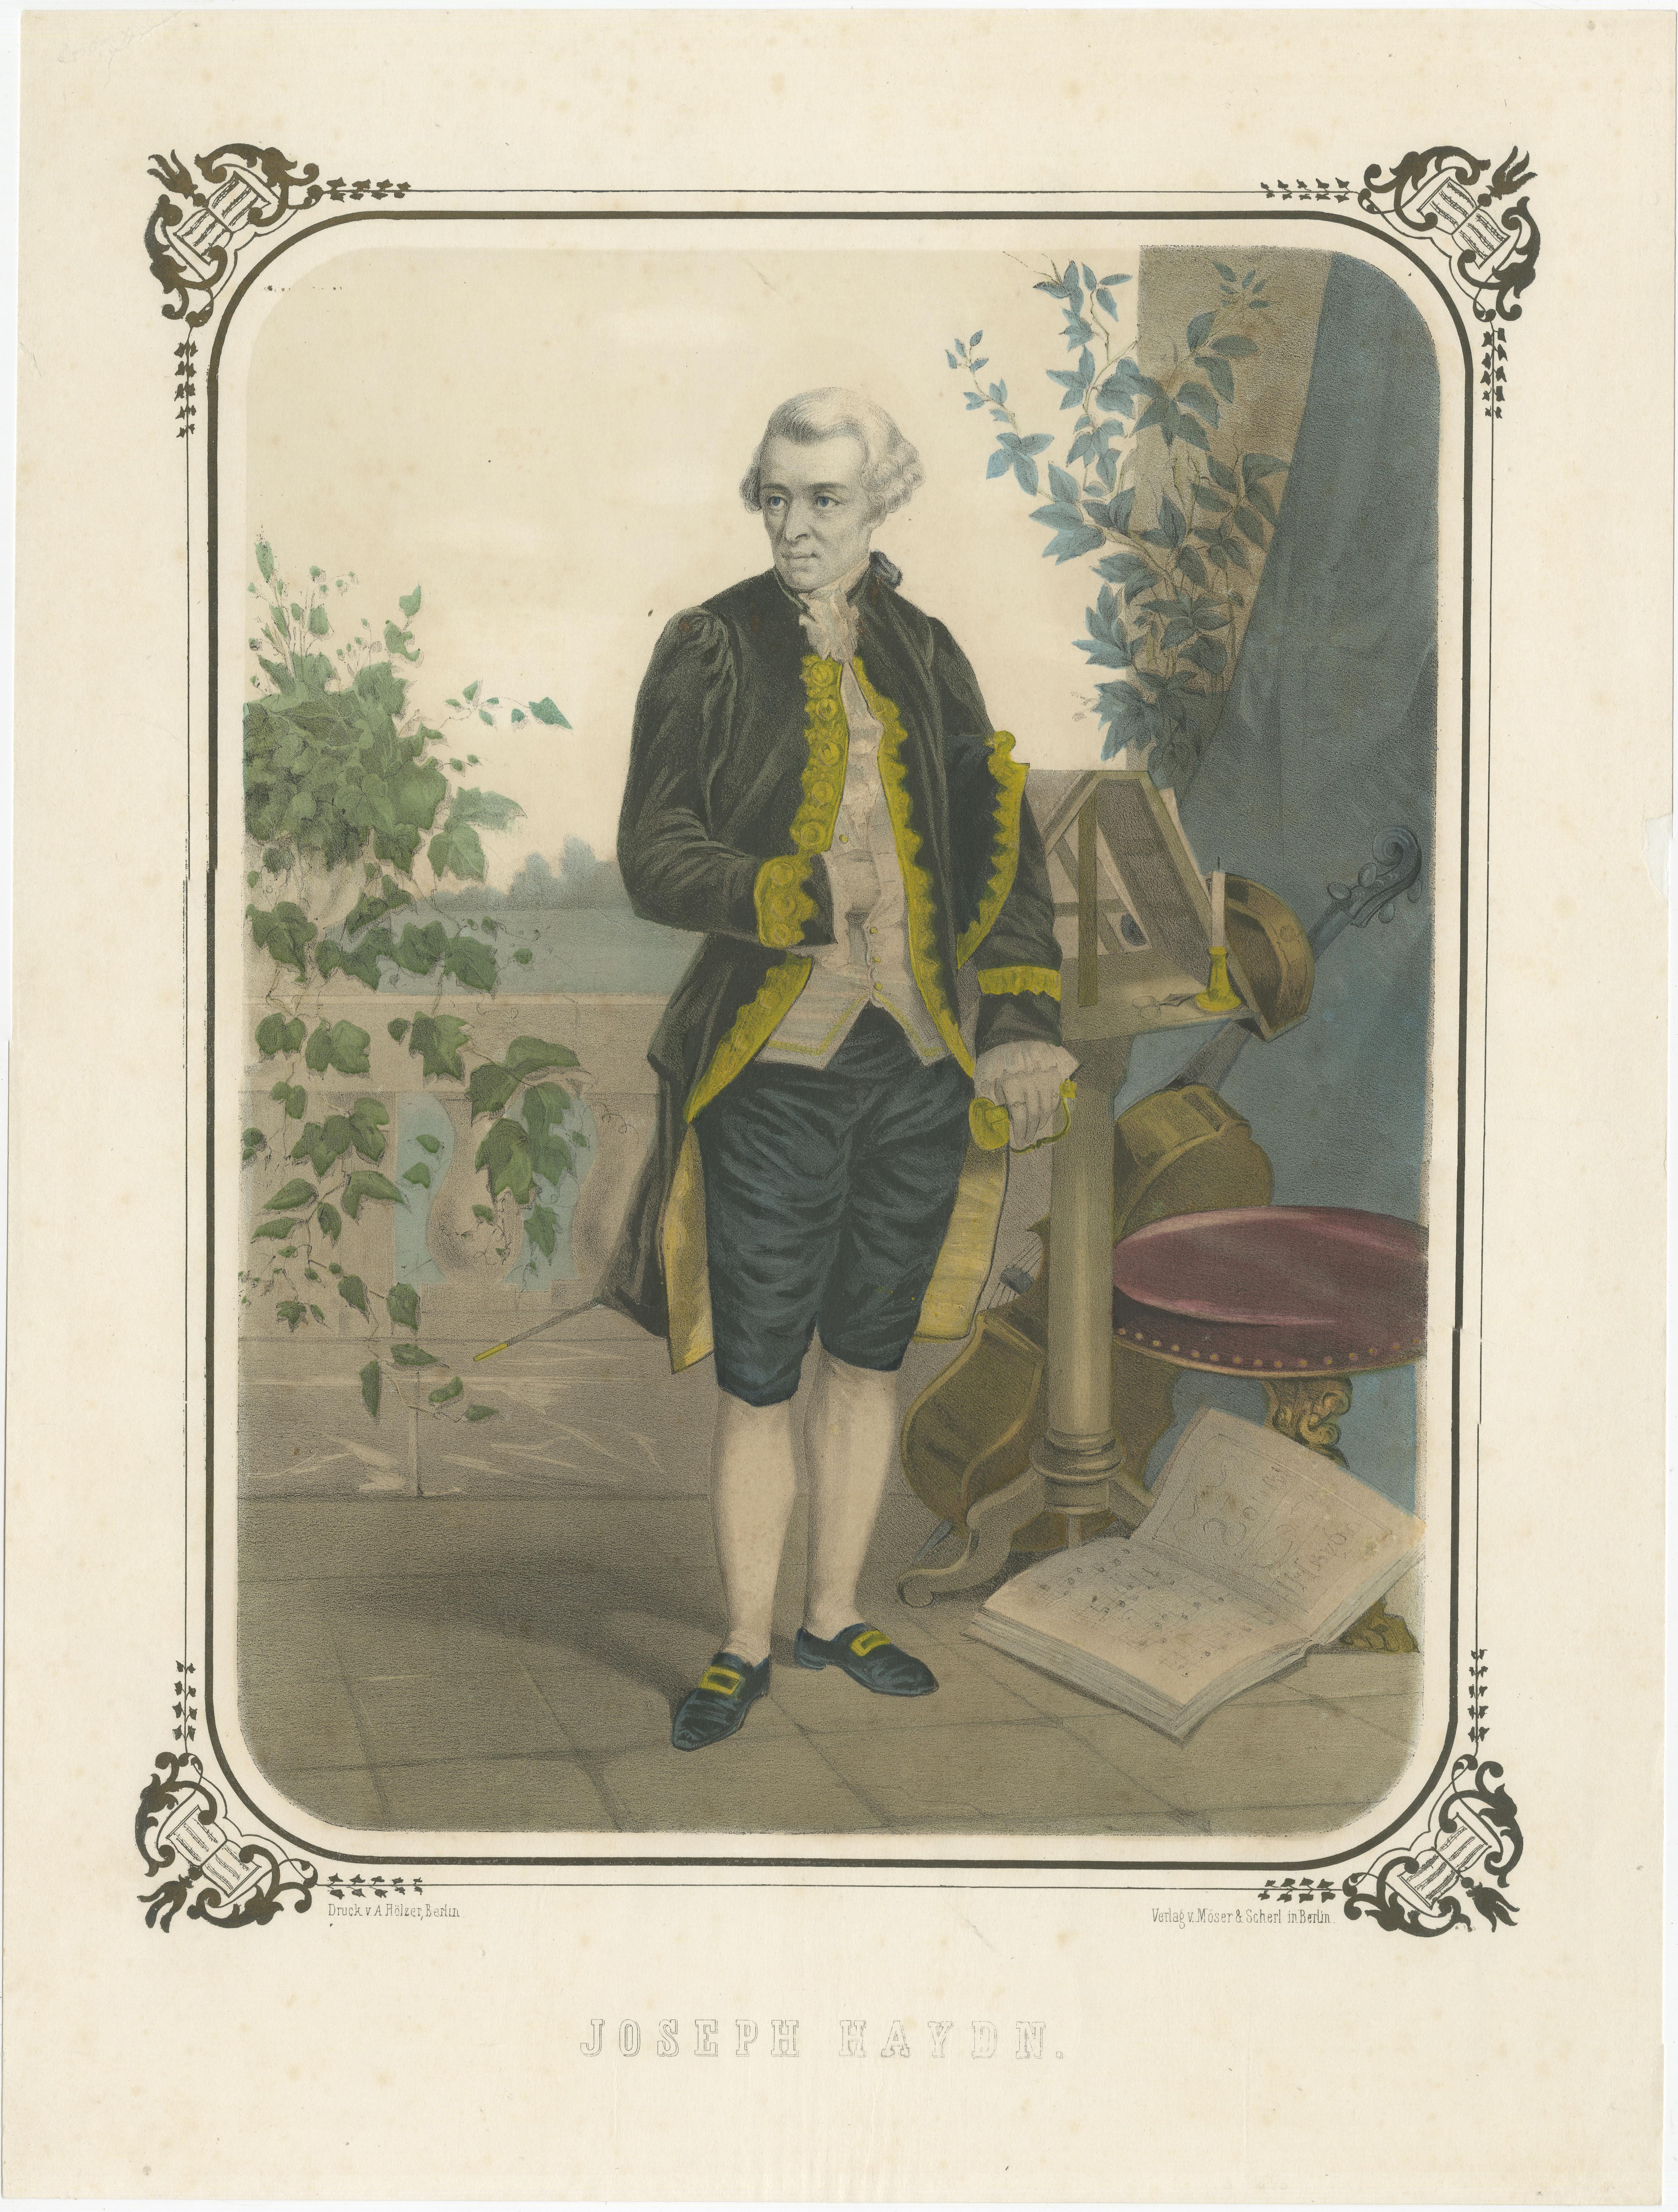 Antique print titled 'Joseph Haydn'. Old portrait of Franz Joseph Haydn. The portrait showcases a full-length view of Haydn. A music stand and cello beside him suggests that he is either composing or preparing for a performance. Published by Möser &